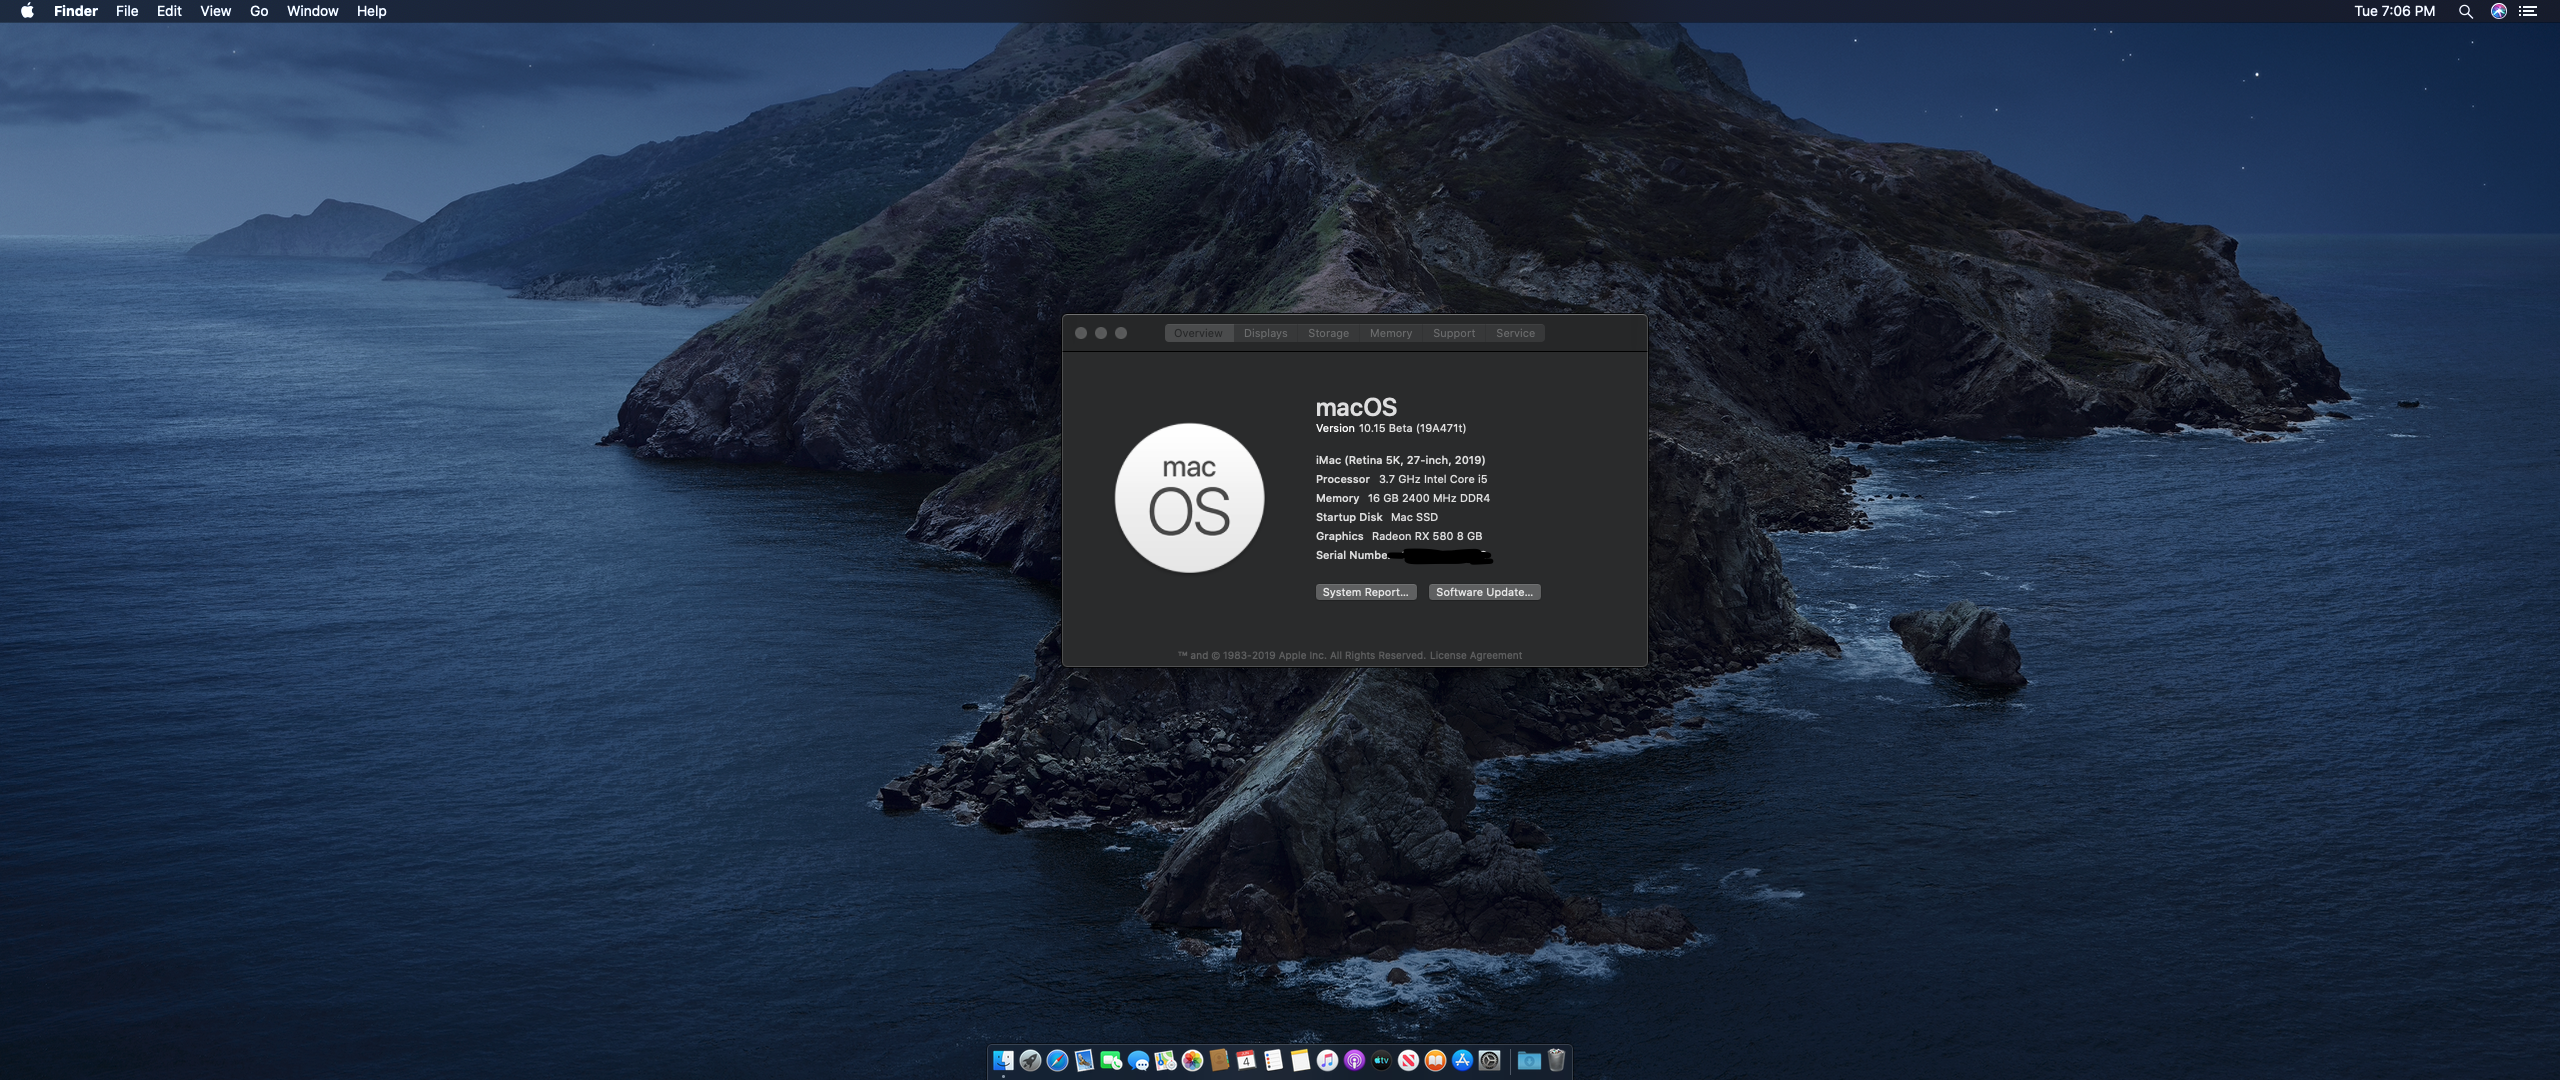 wine for mac os x 10.5.8